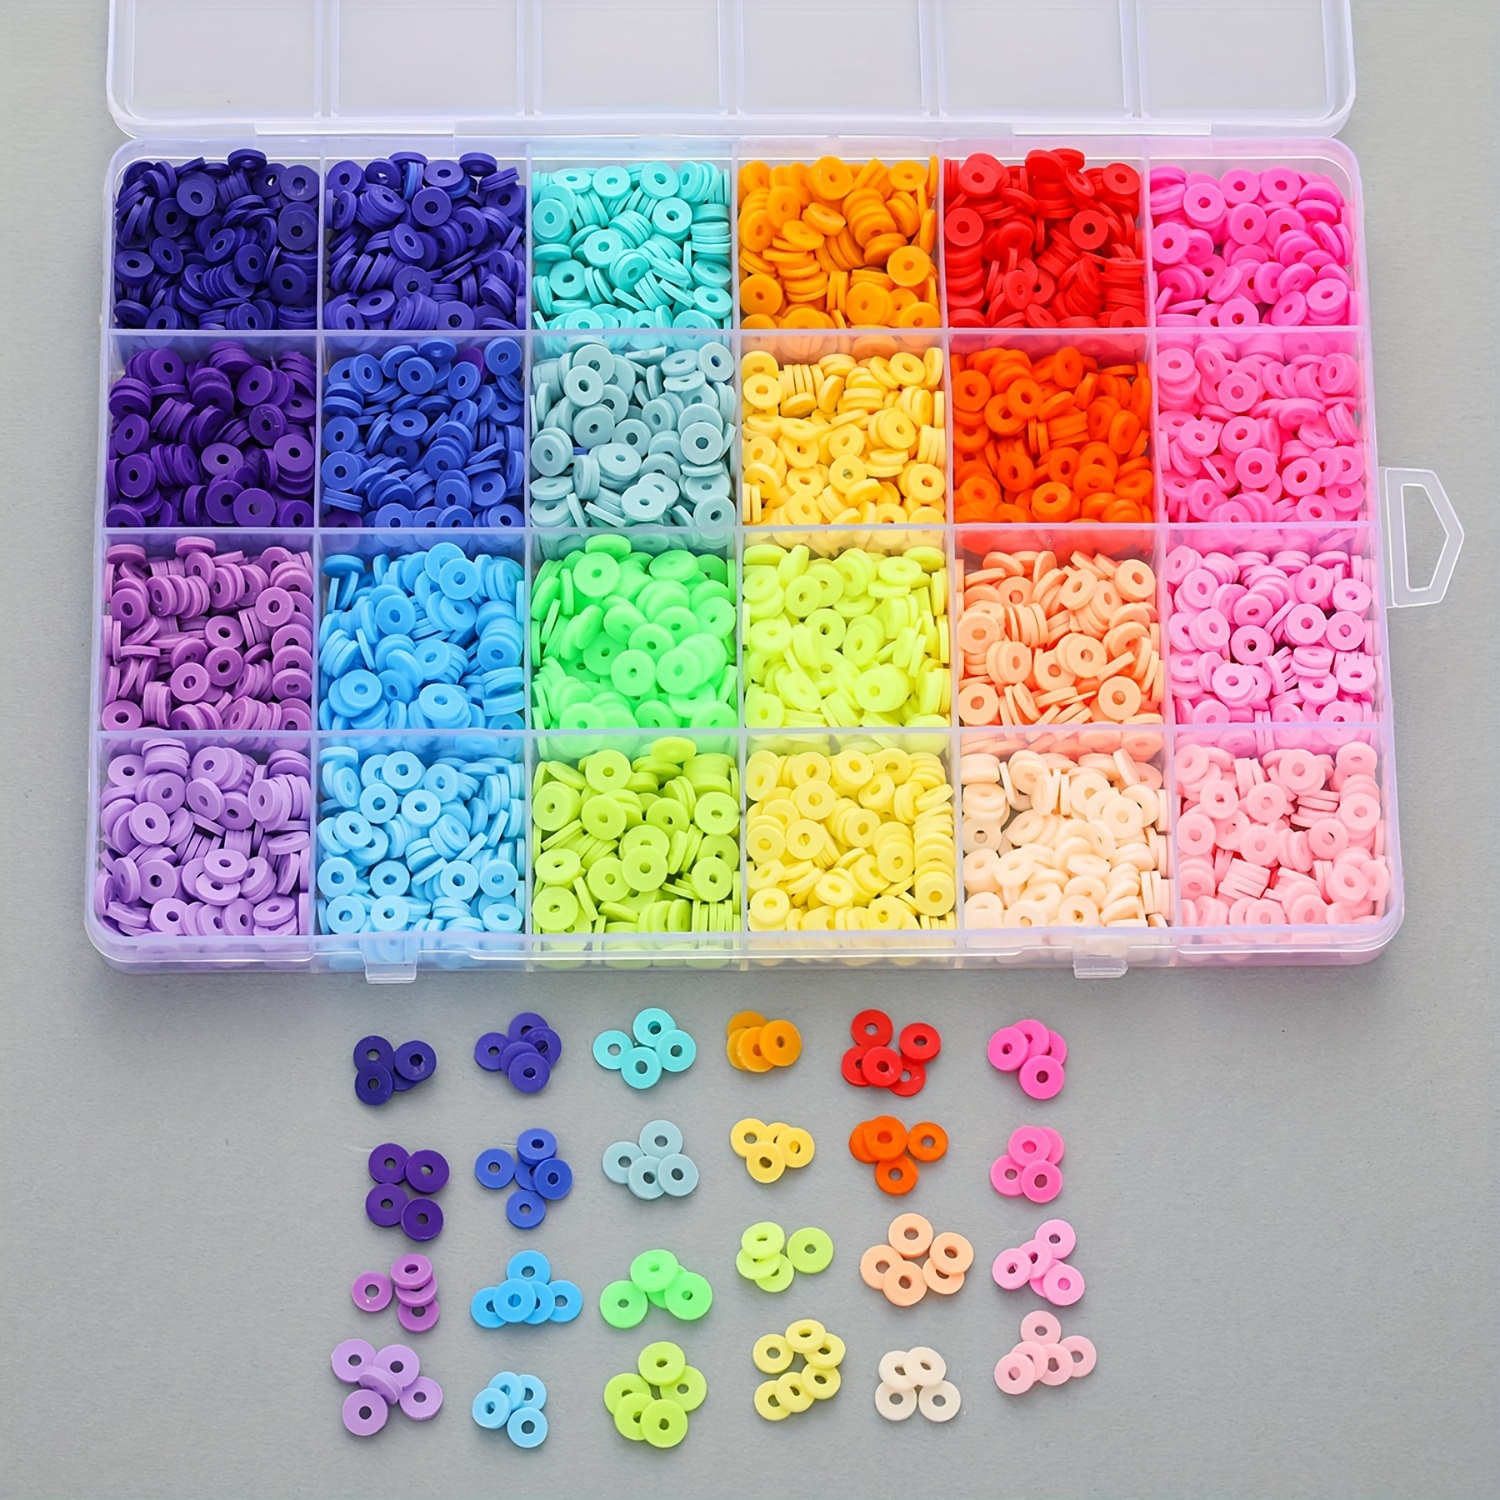 

4800-piece Polymer Clay Bead Kit - 24 Vibrant Colors, Assorted Sizes, Ideal For Diy Jewelry Making & Crafts